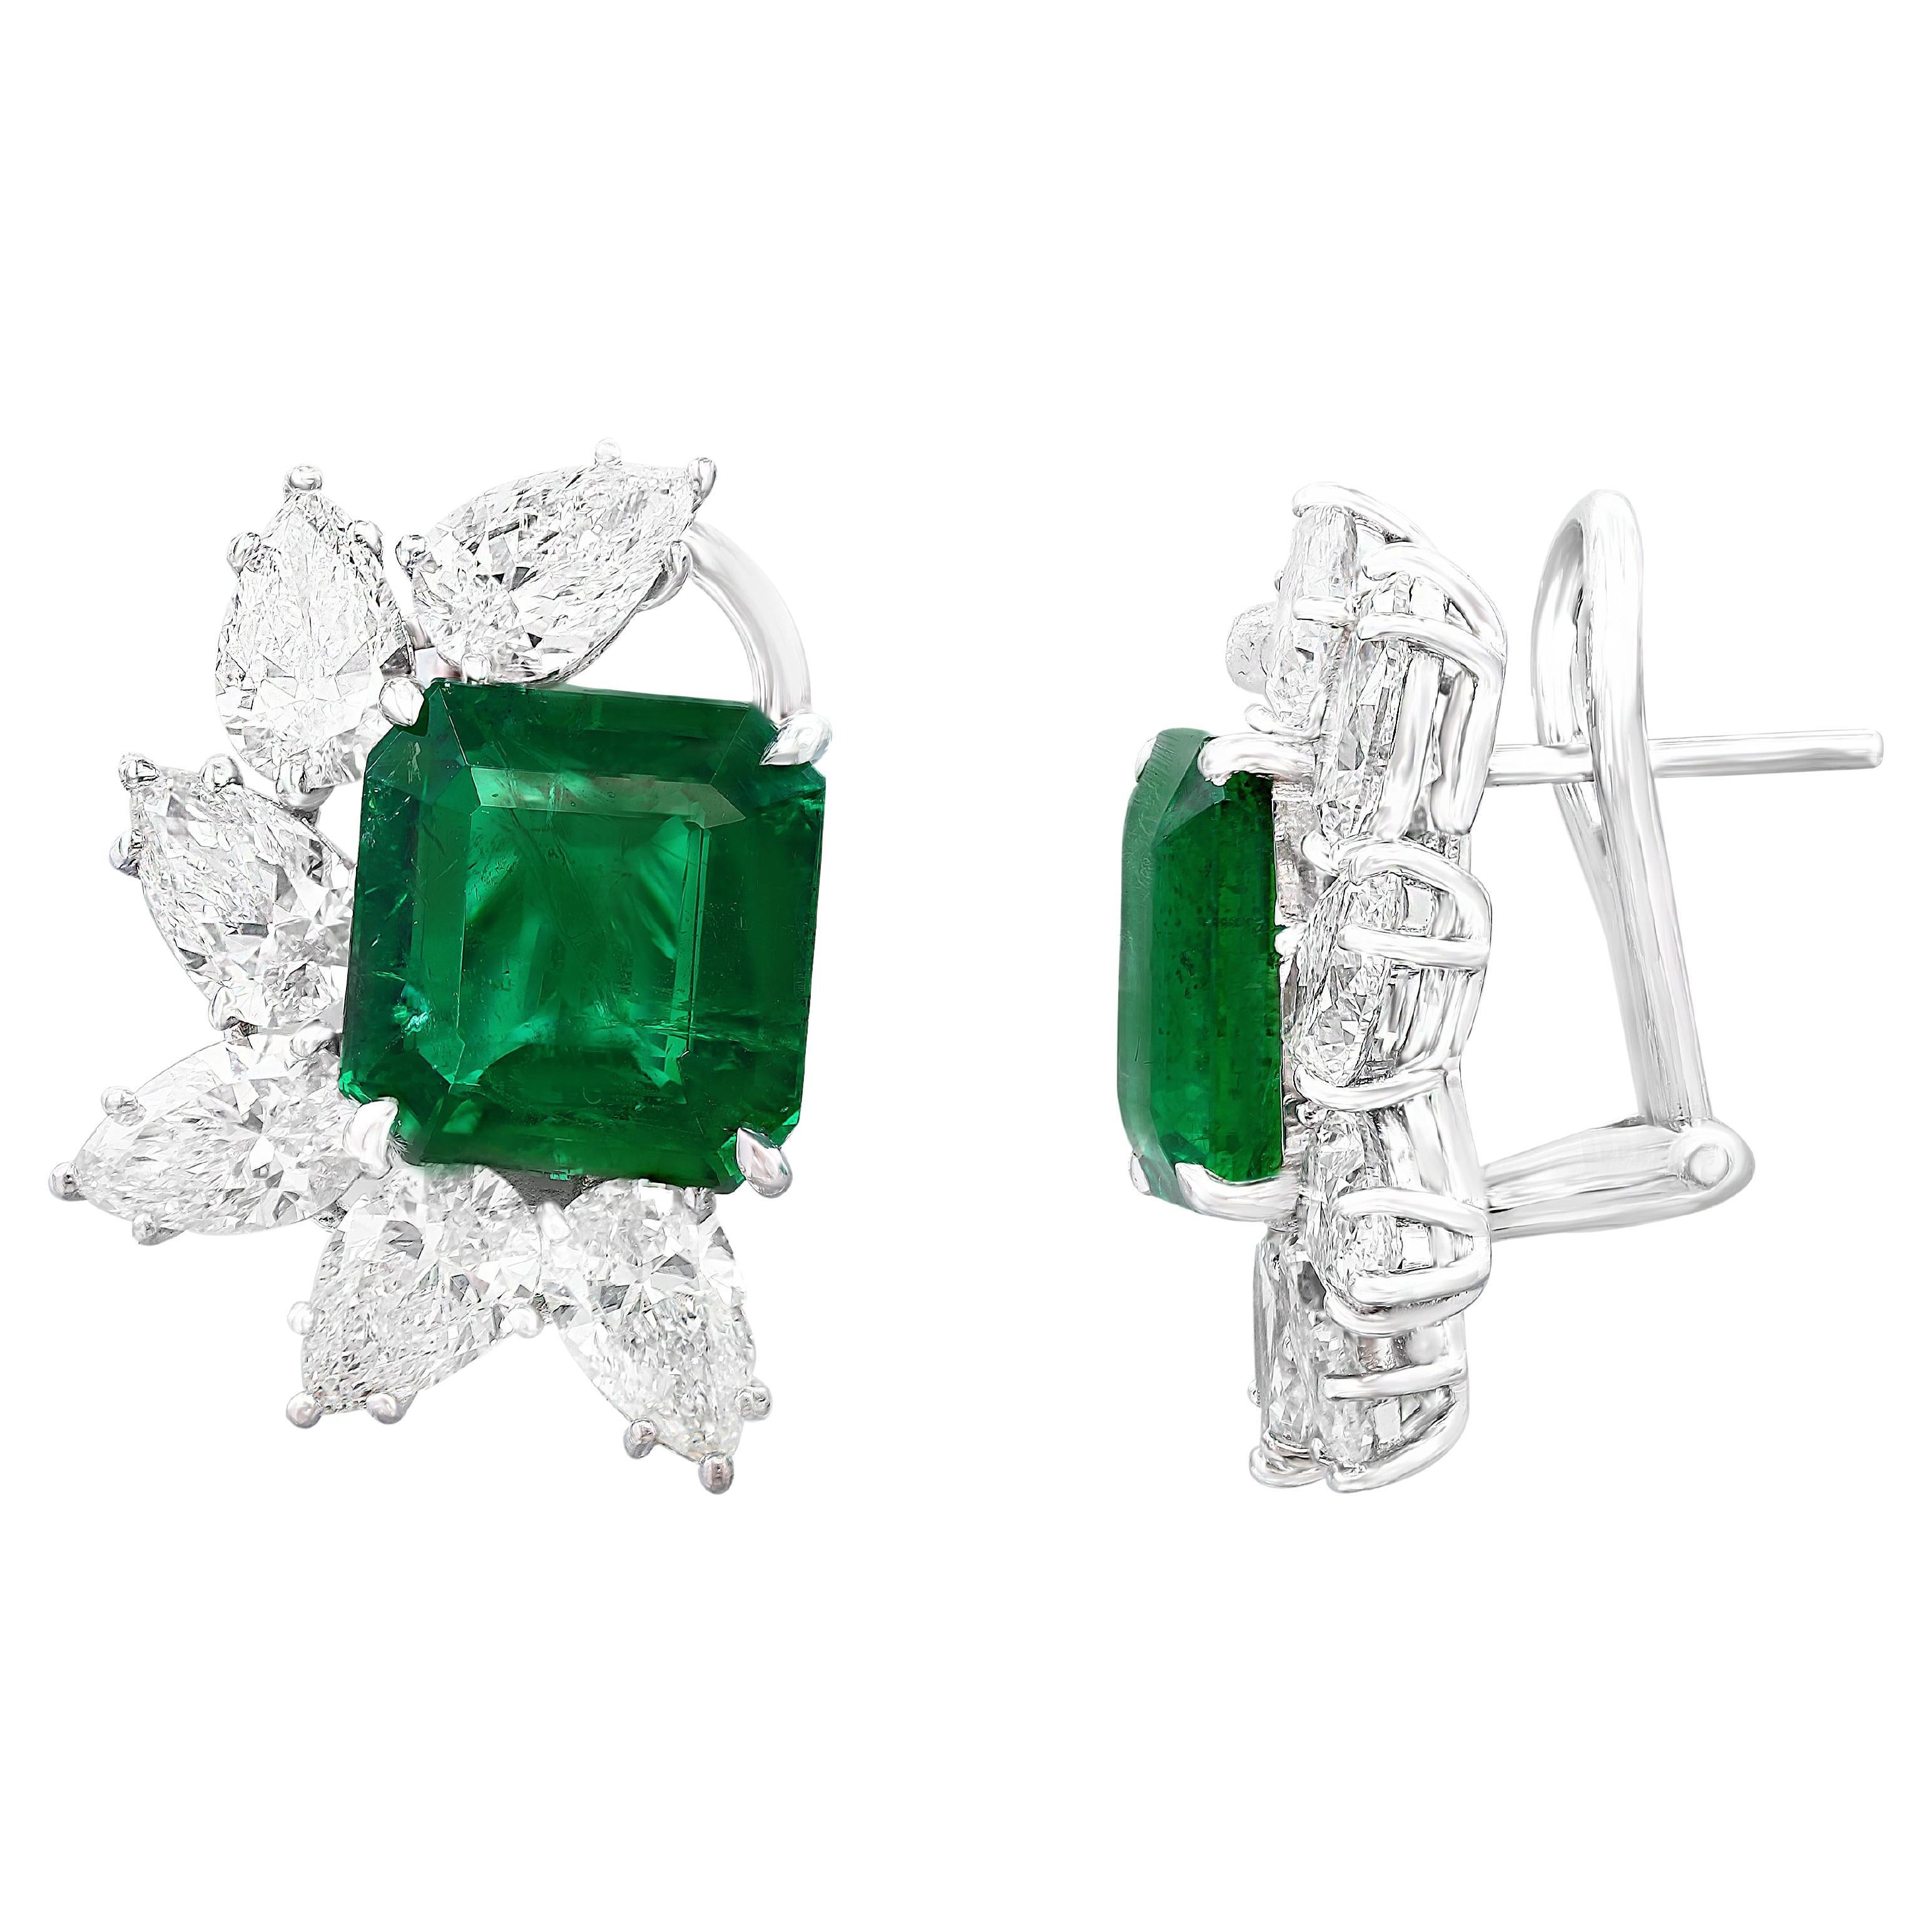 Certified 7.82 Carat Emerald Cut Emerald and Diamond Cluster Earrings in 18K  For Sale